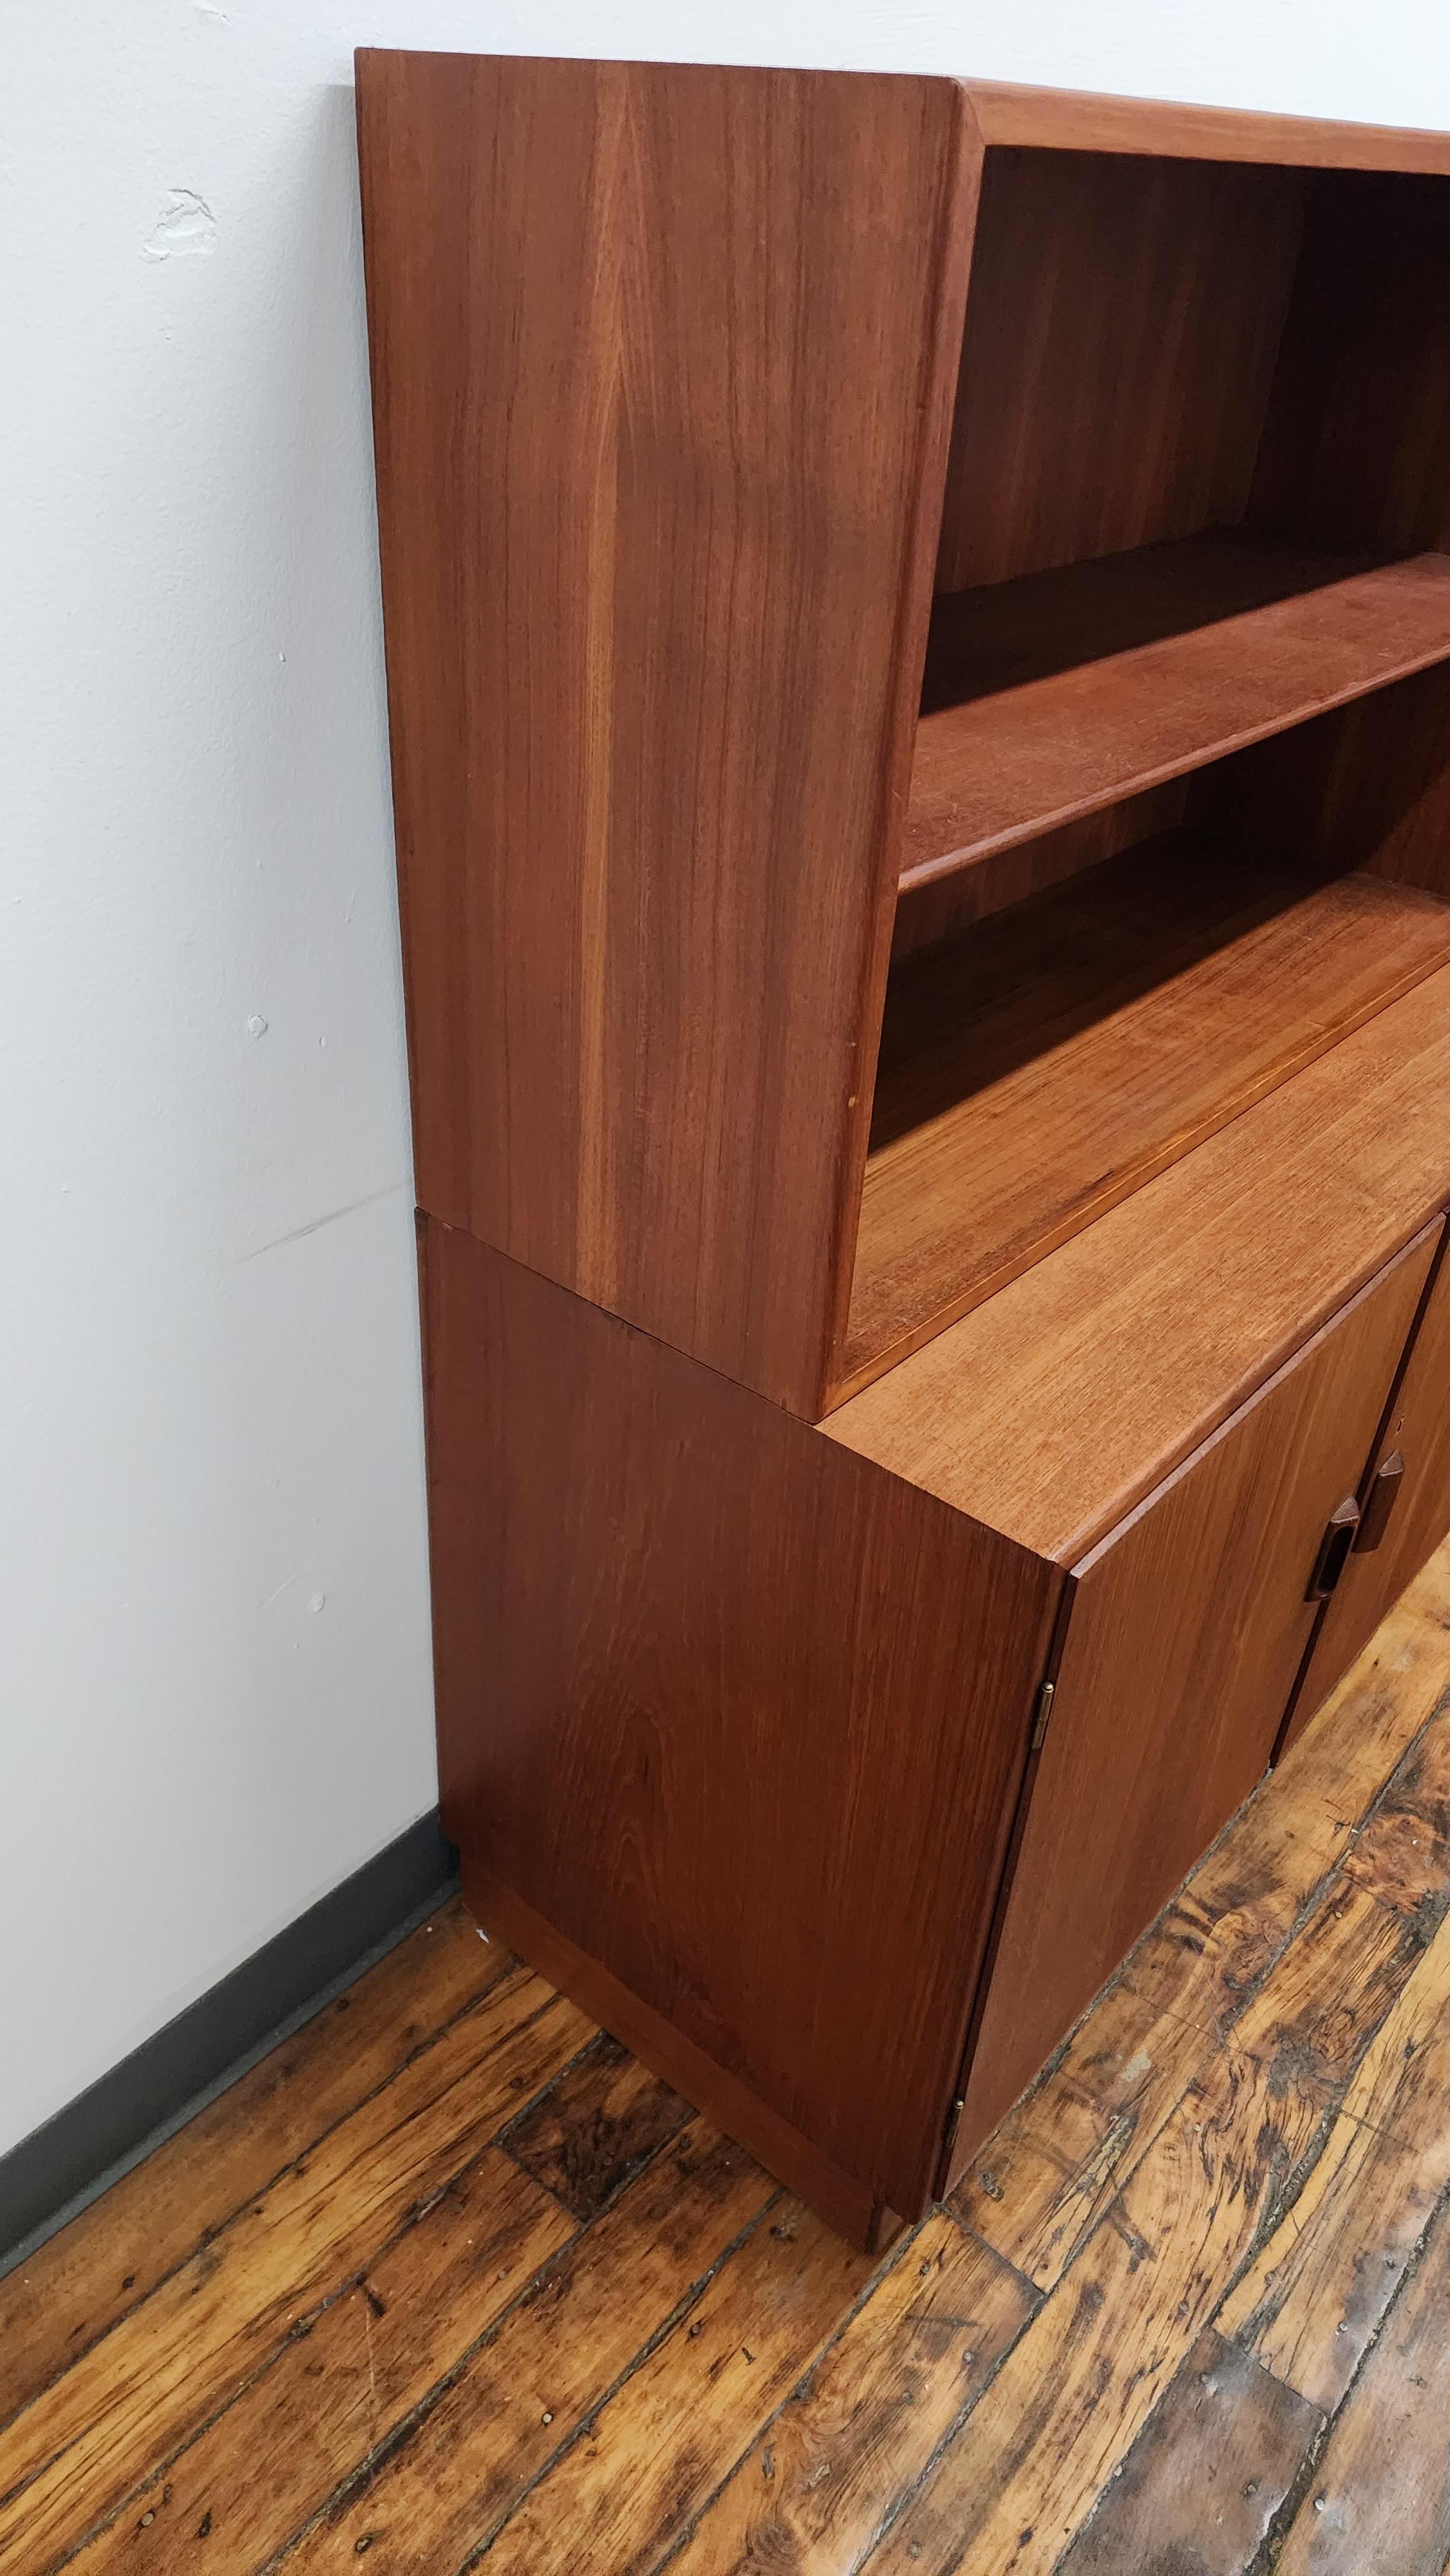 Borge Mogensen for soberg teak cabinet and bookshelf.  the cabinet doors open to a shelf inside. the bookshelf on top is removable and has an adjustable shelf.  no key is present.